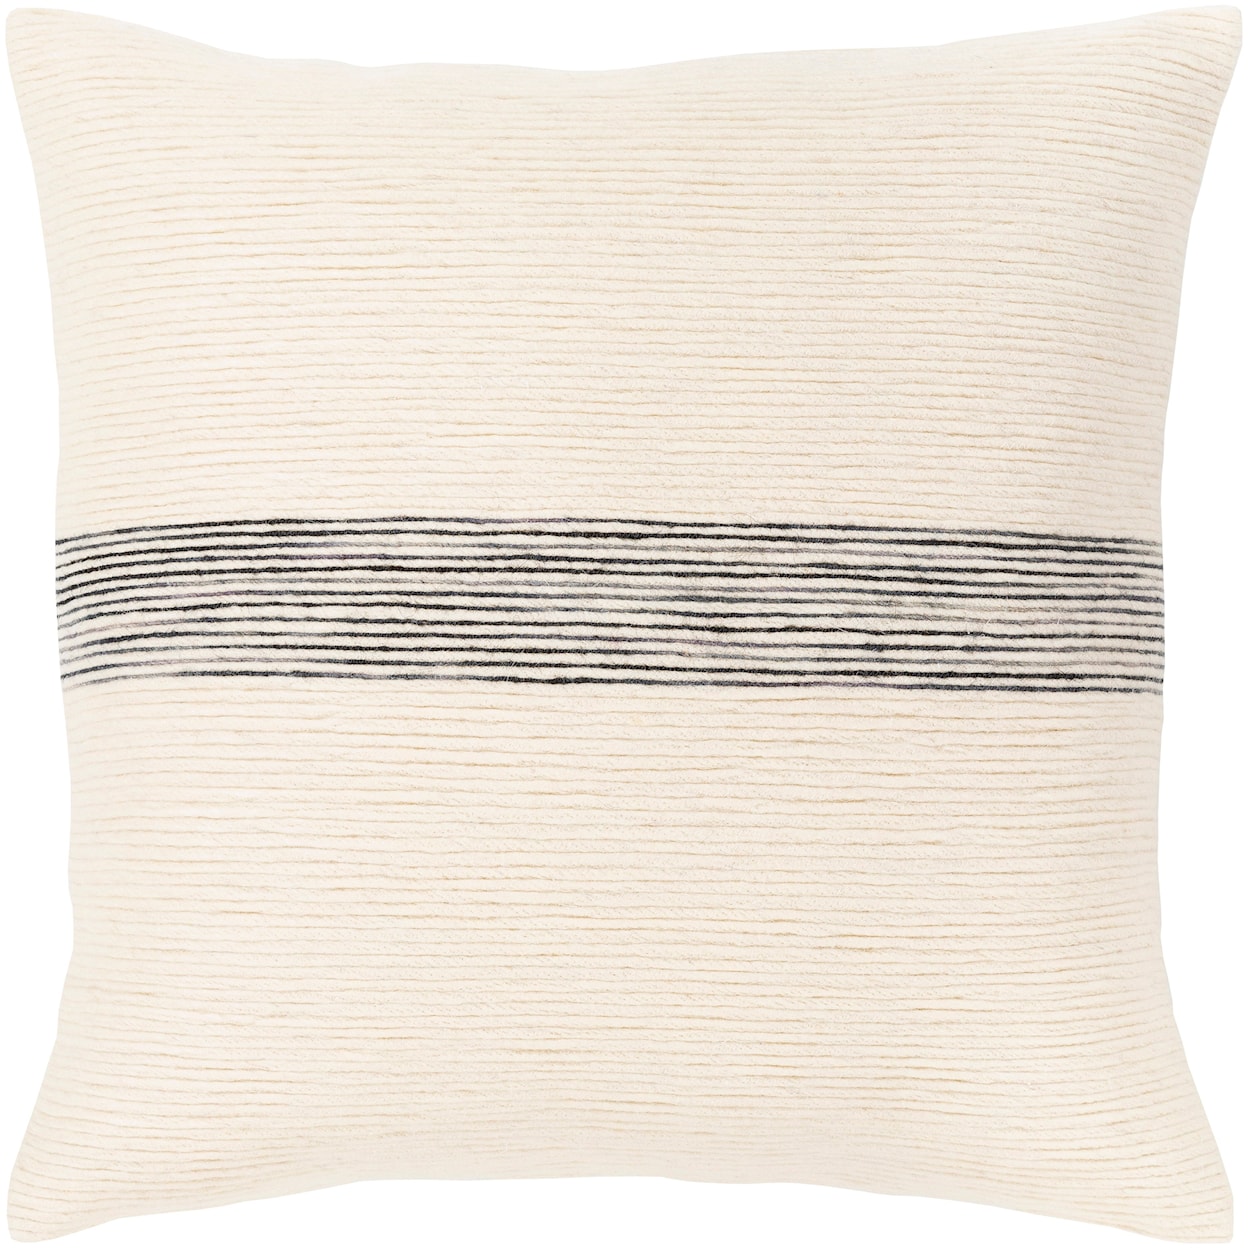 Surya Rugs Carine Pillow Cover